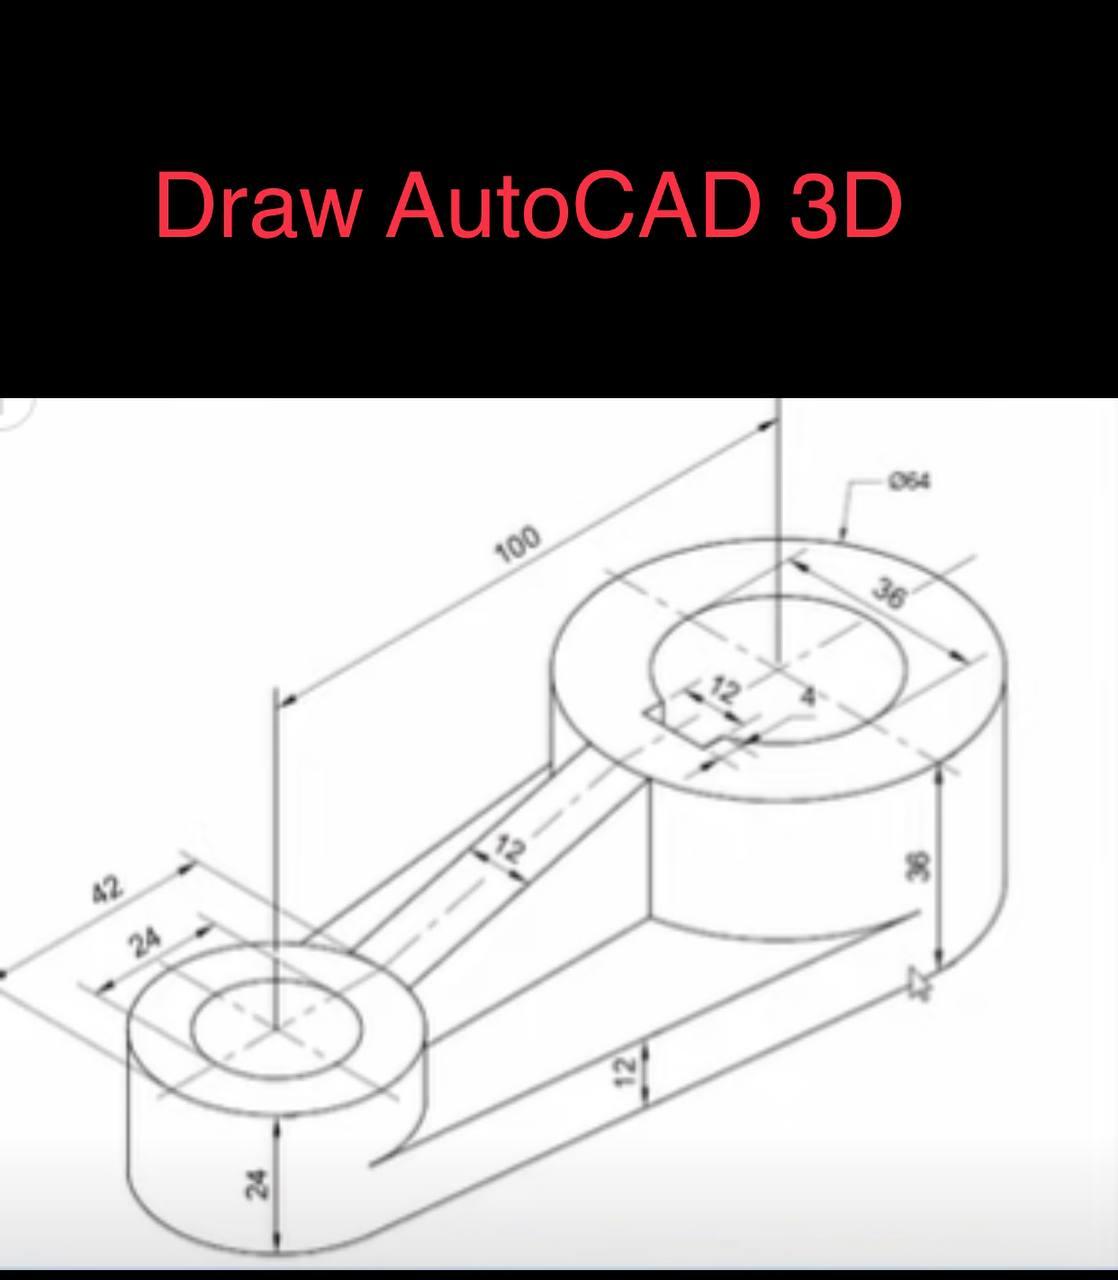 Eng-Source | CAD Drafting Services, Affordable AutoCAD Design Services,  Mechanical Design, Architectural Drafting & Process Engineering Services